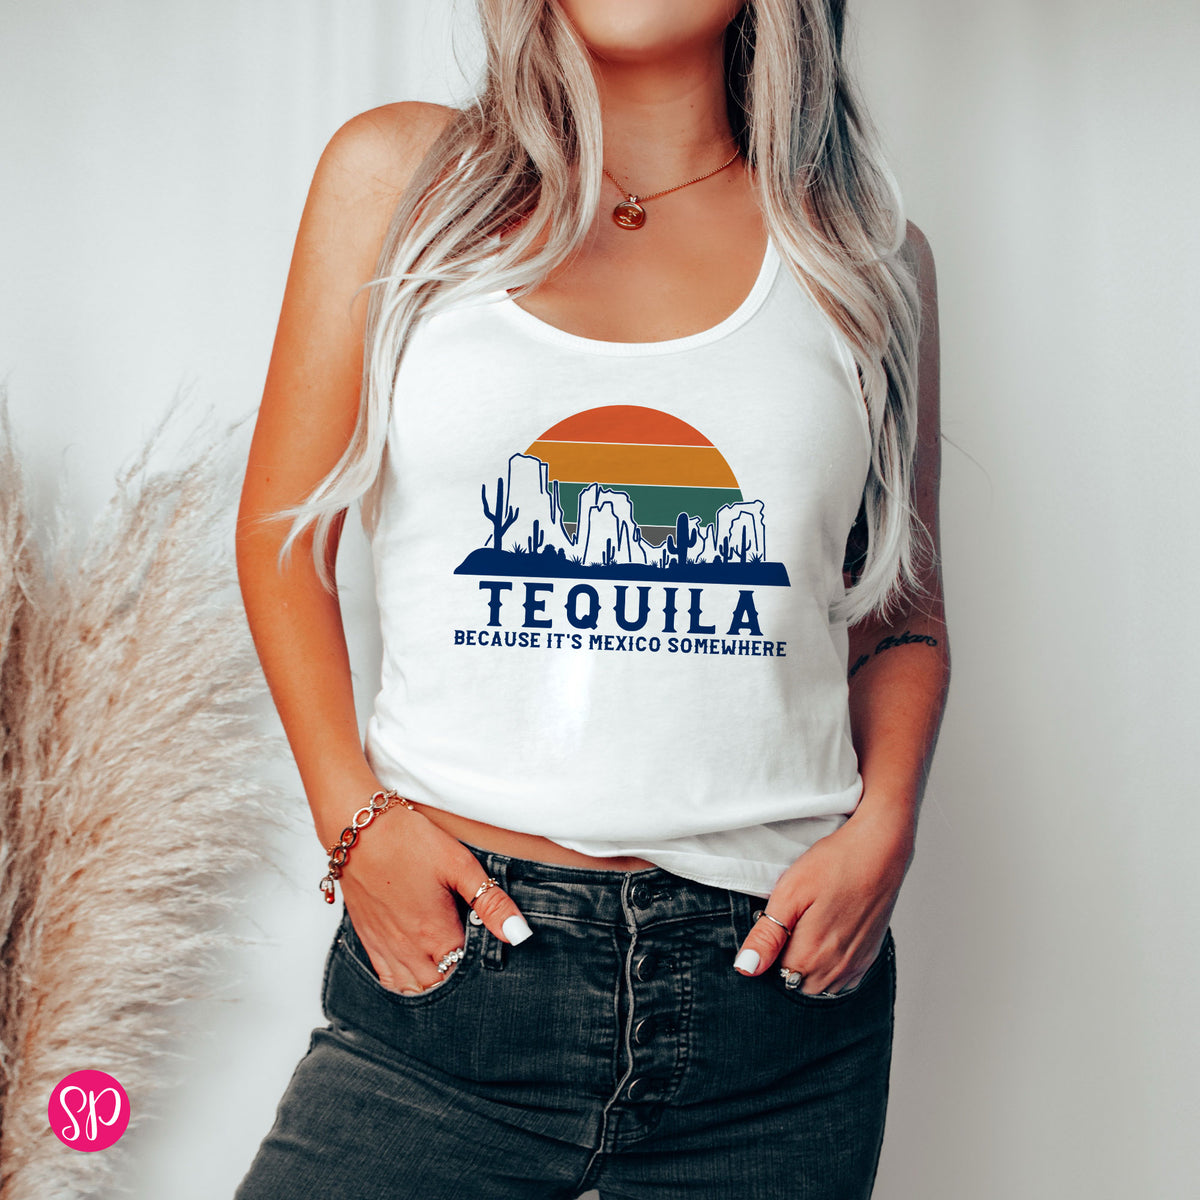 Tequila Because it’s Mexico Somewhere Tank Top